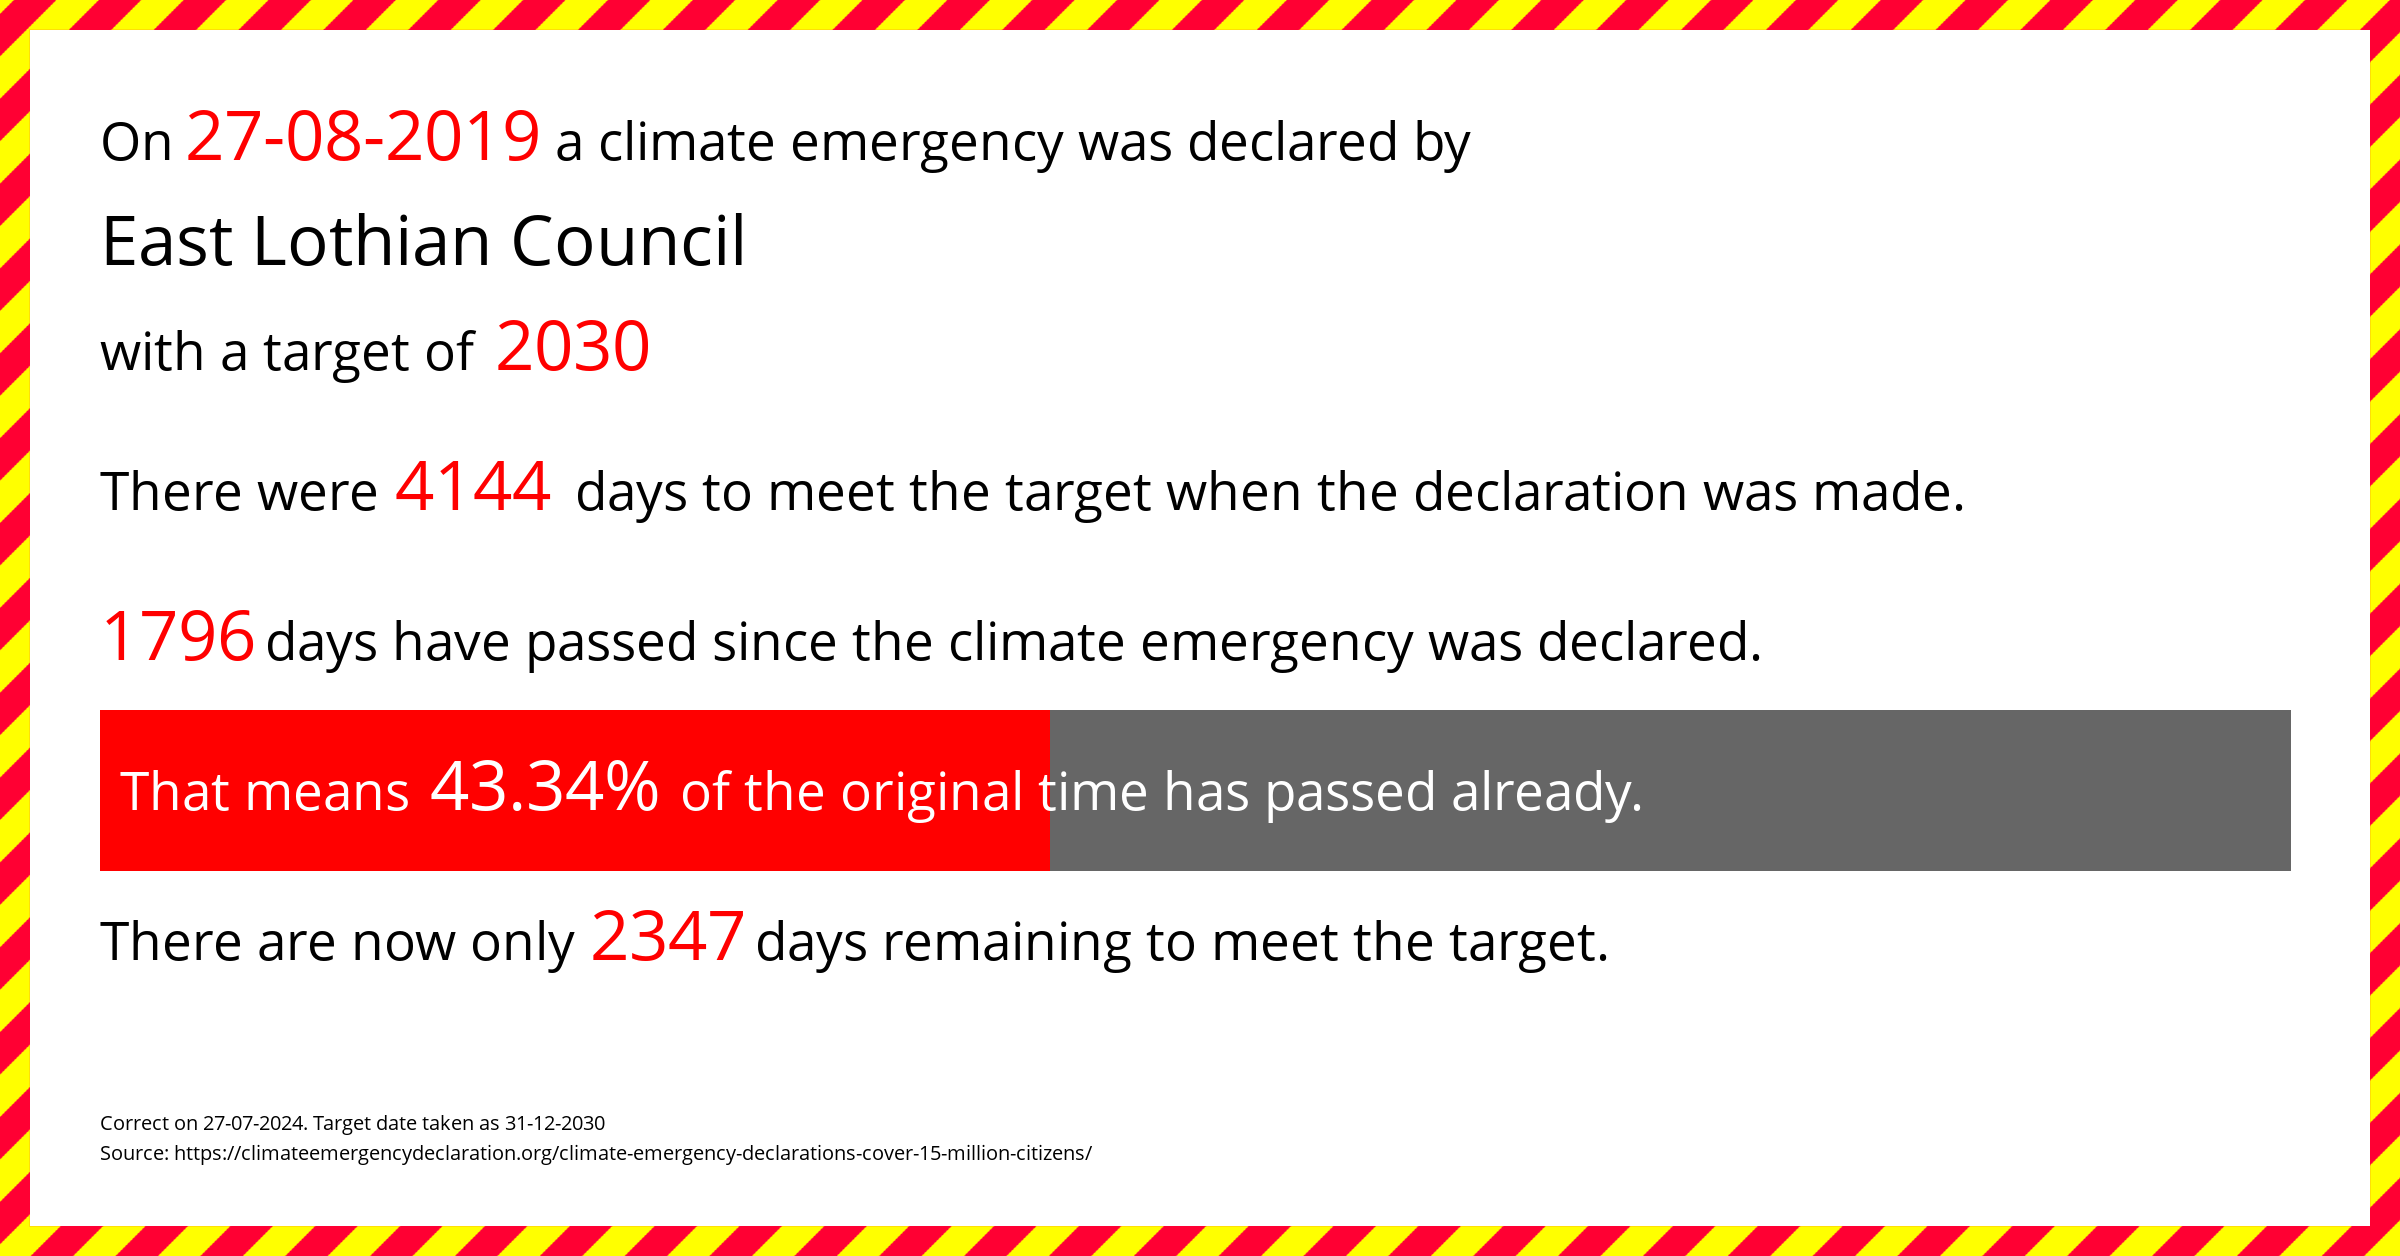 East Lothian Council declared a Climate emergency on Tuesday 27th August 2019, with a target of 2030.